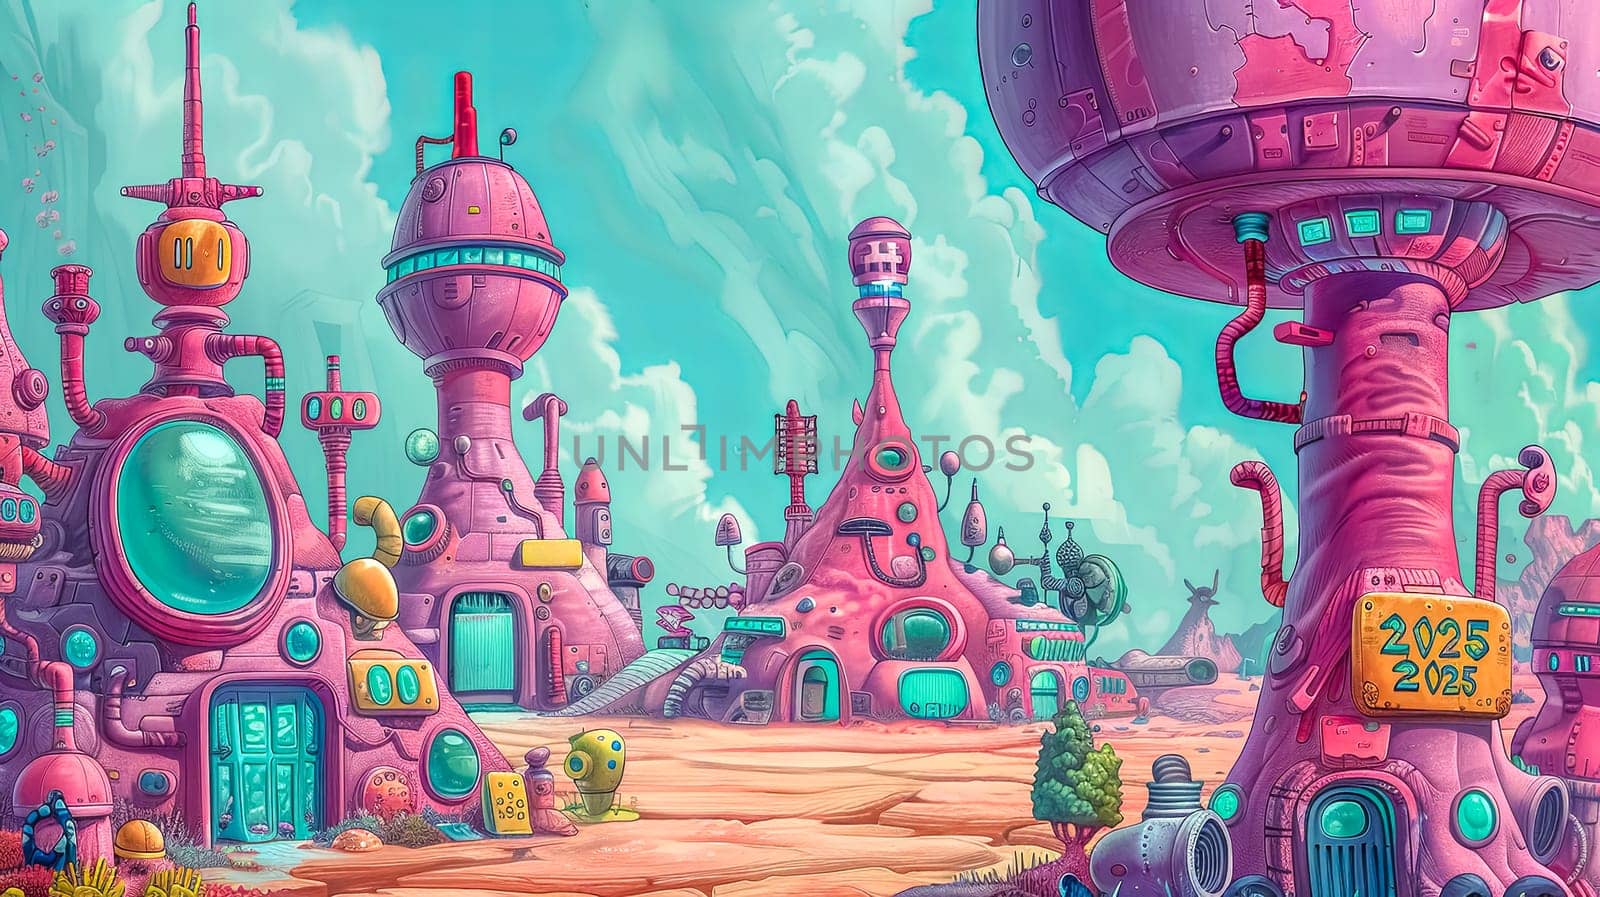 Vibrant and imaginative alien city illustration with playful structures under a clear sky